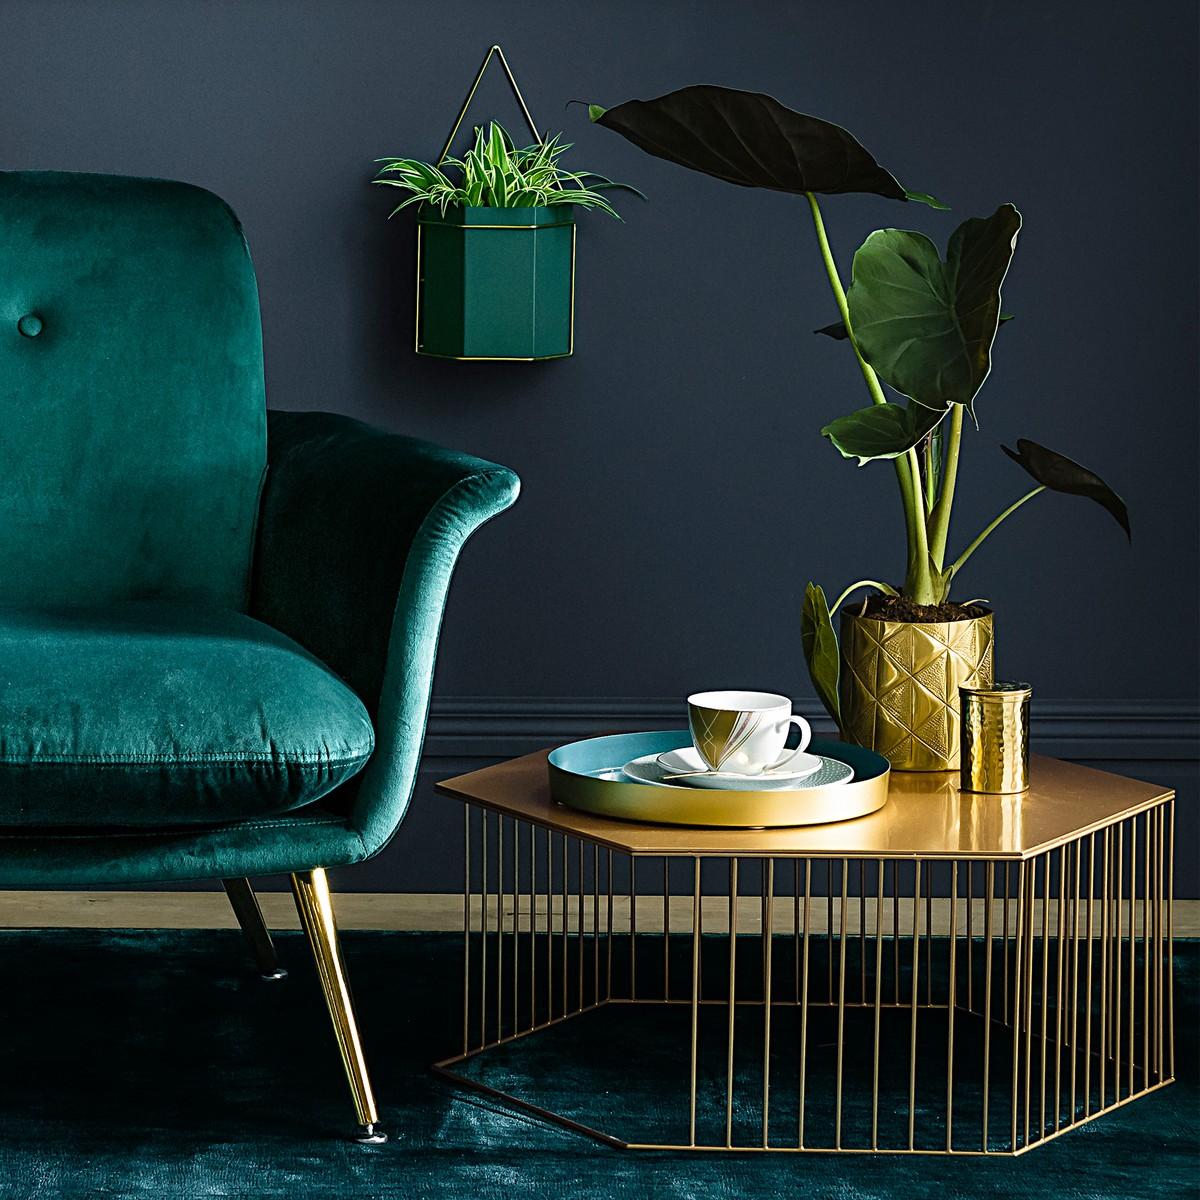 Green, gold and navy home decor inspiration| Today we're talking inspiration for adding green to your living room. Green is a really versatile colour to decorate your home with. But, which colours and tones work well? What kind of accessories work with green? This post gives you ideas for pulling together an elegant green colour palette and pieces for your home. Read more: kittyandb.com #greenlivingroom #greenaccessories #greencolorpalette #goldaccessories #interiordecoratinginspiration #greenaesthetic #greenandgold #navyandgreen